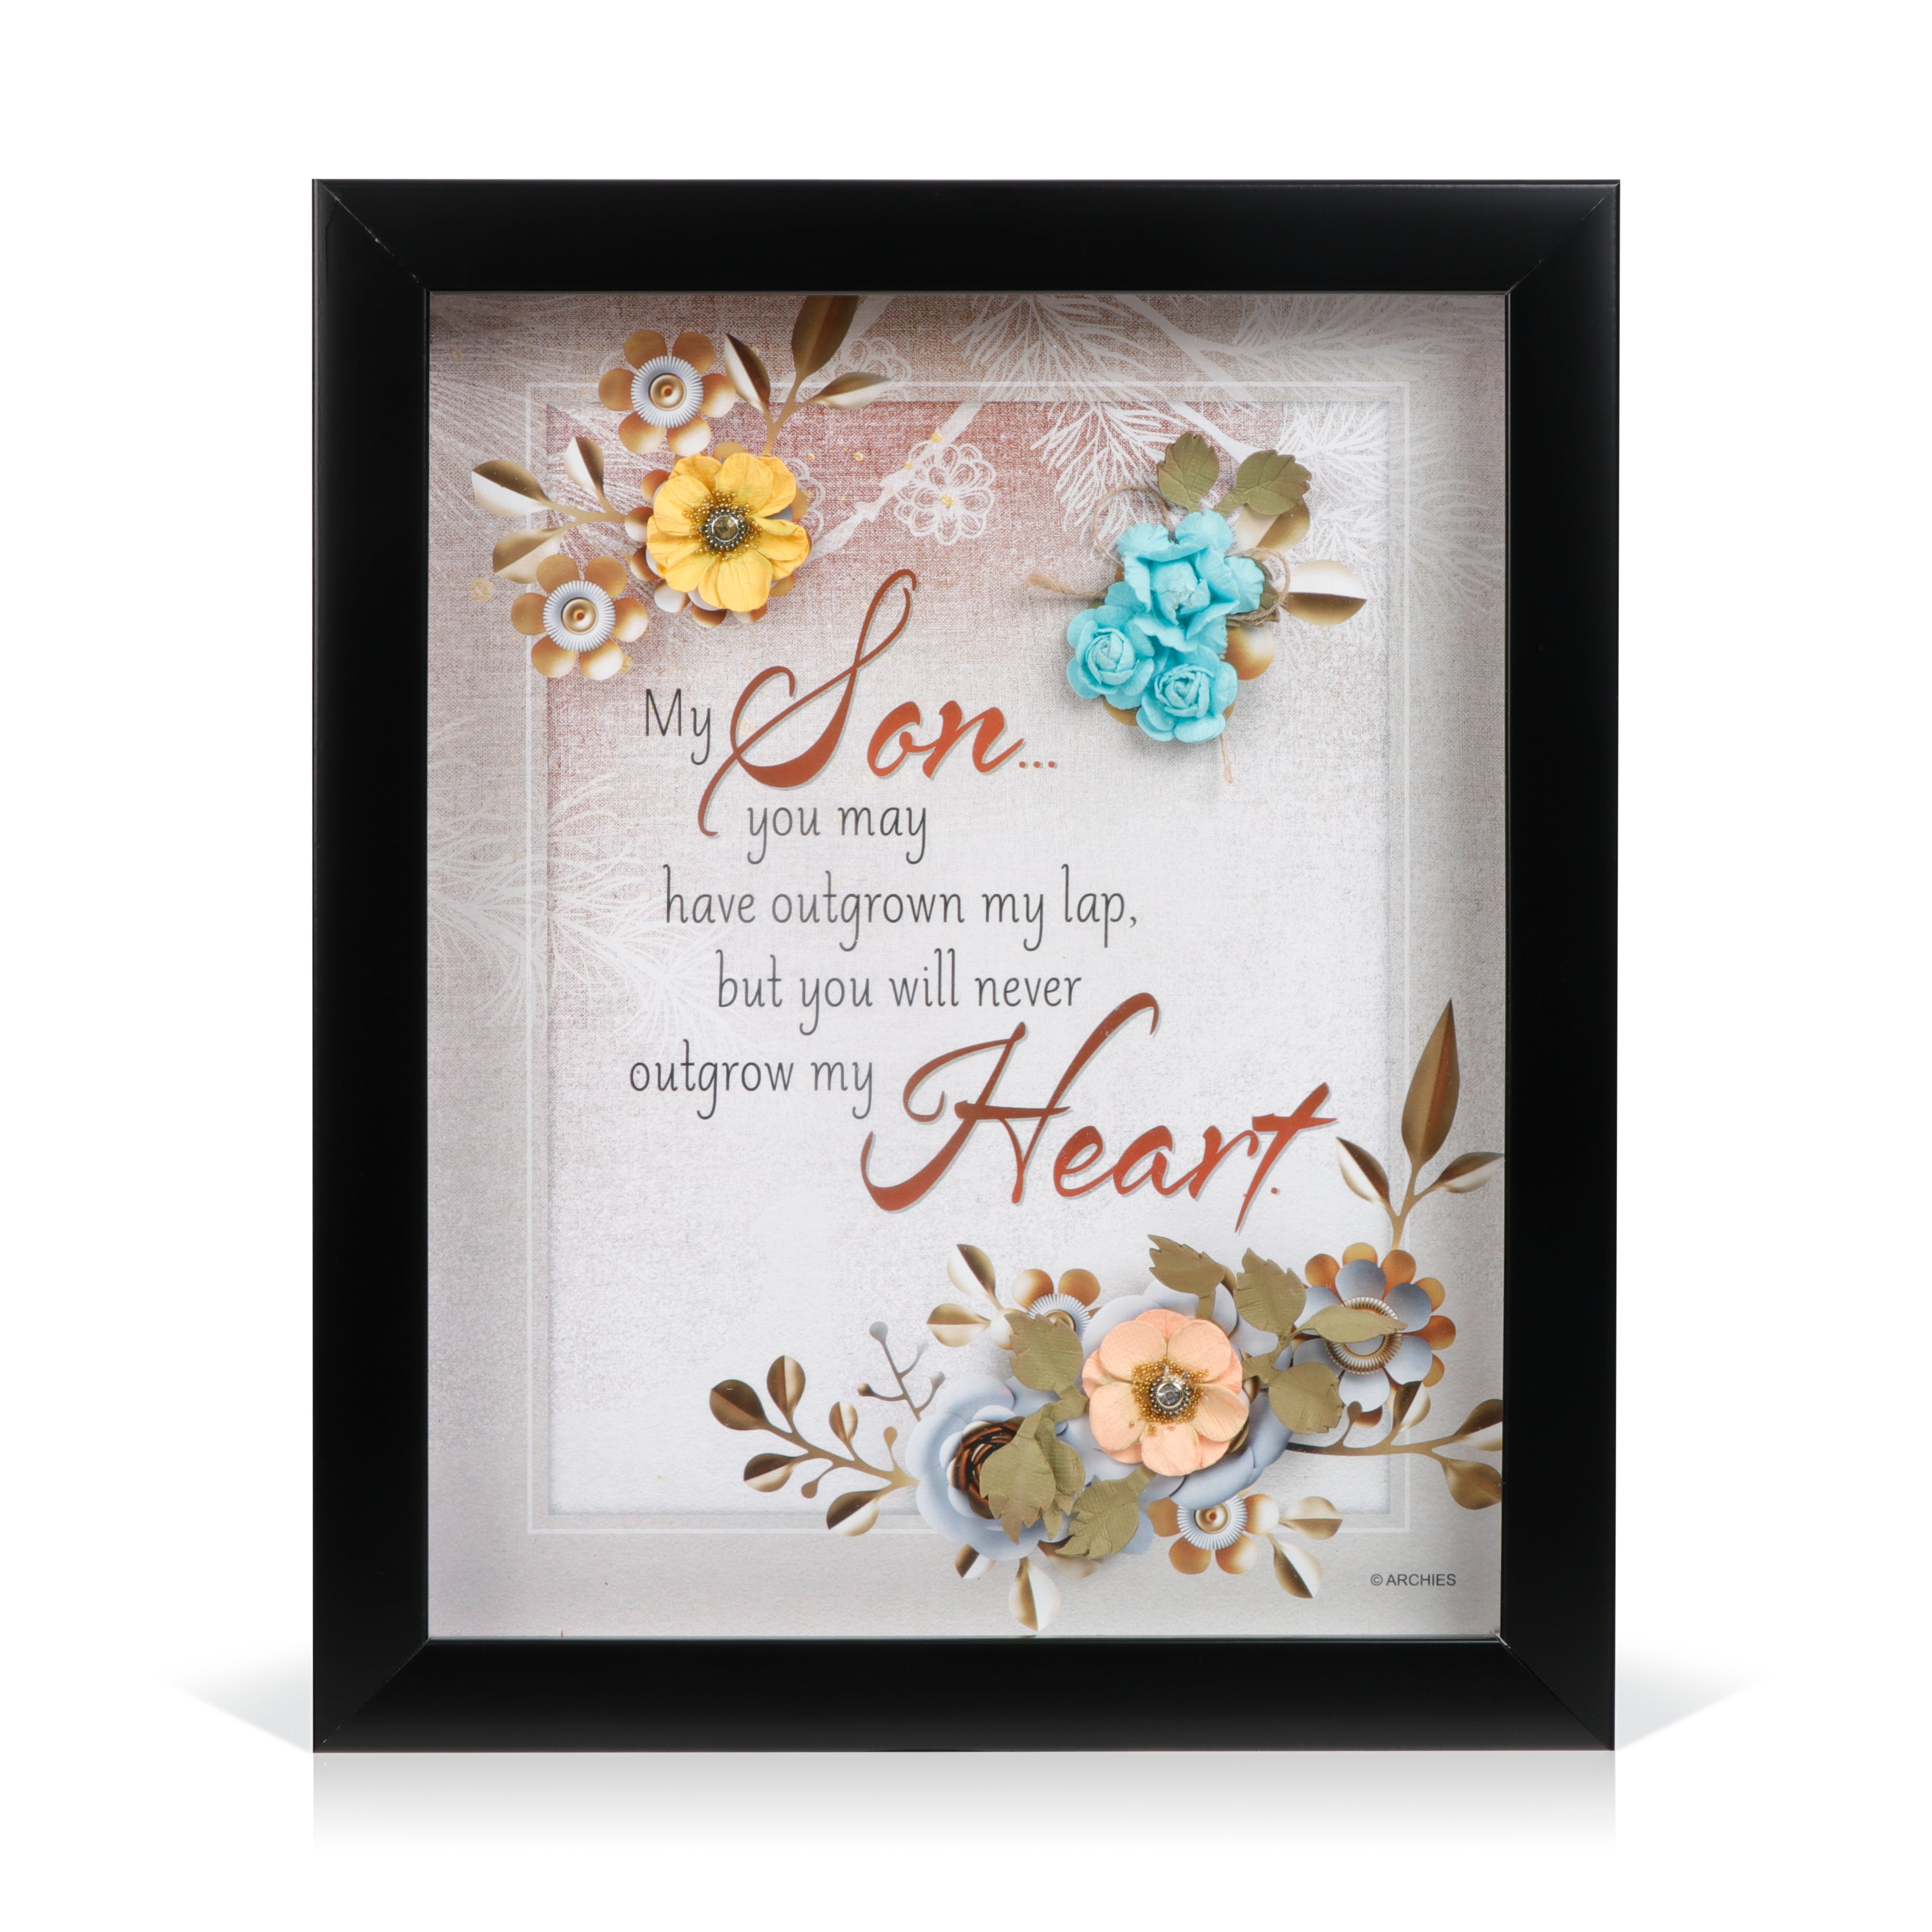 Archies | Archies KEEPSAKE QUOTATION - MY SON YOU MAY.... For gifting and Home décor